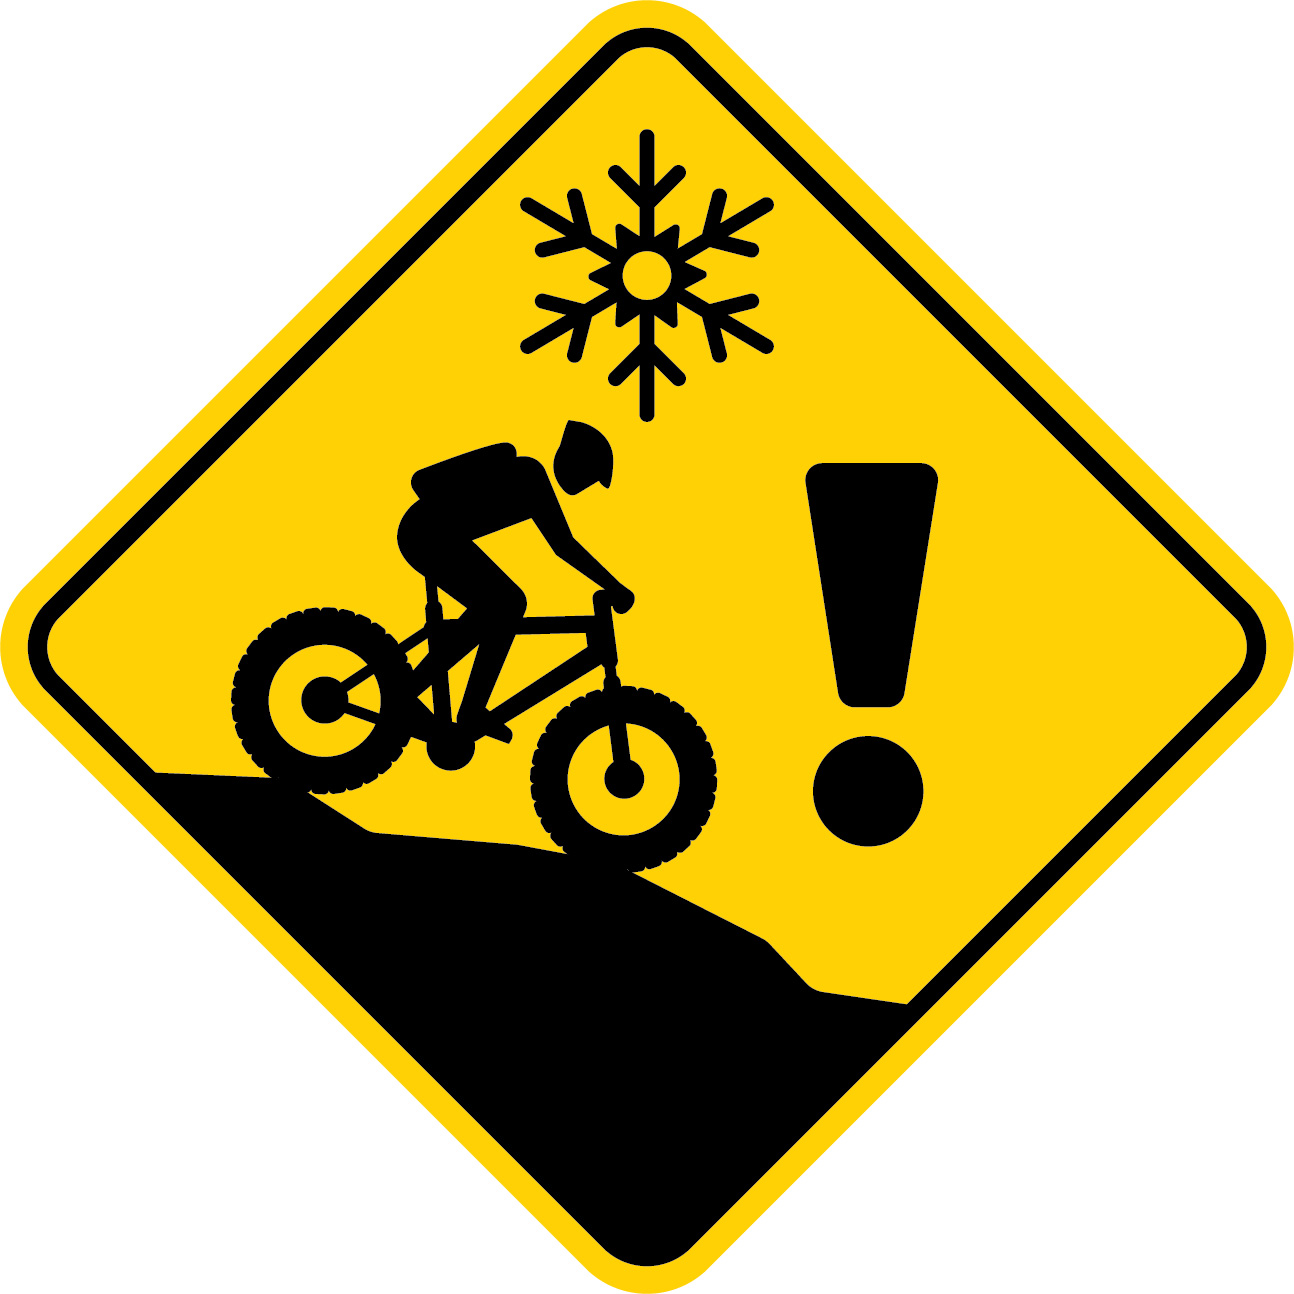 D-14 - Fatbike attention